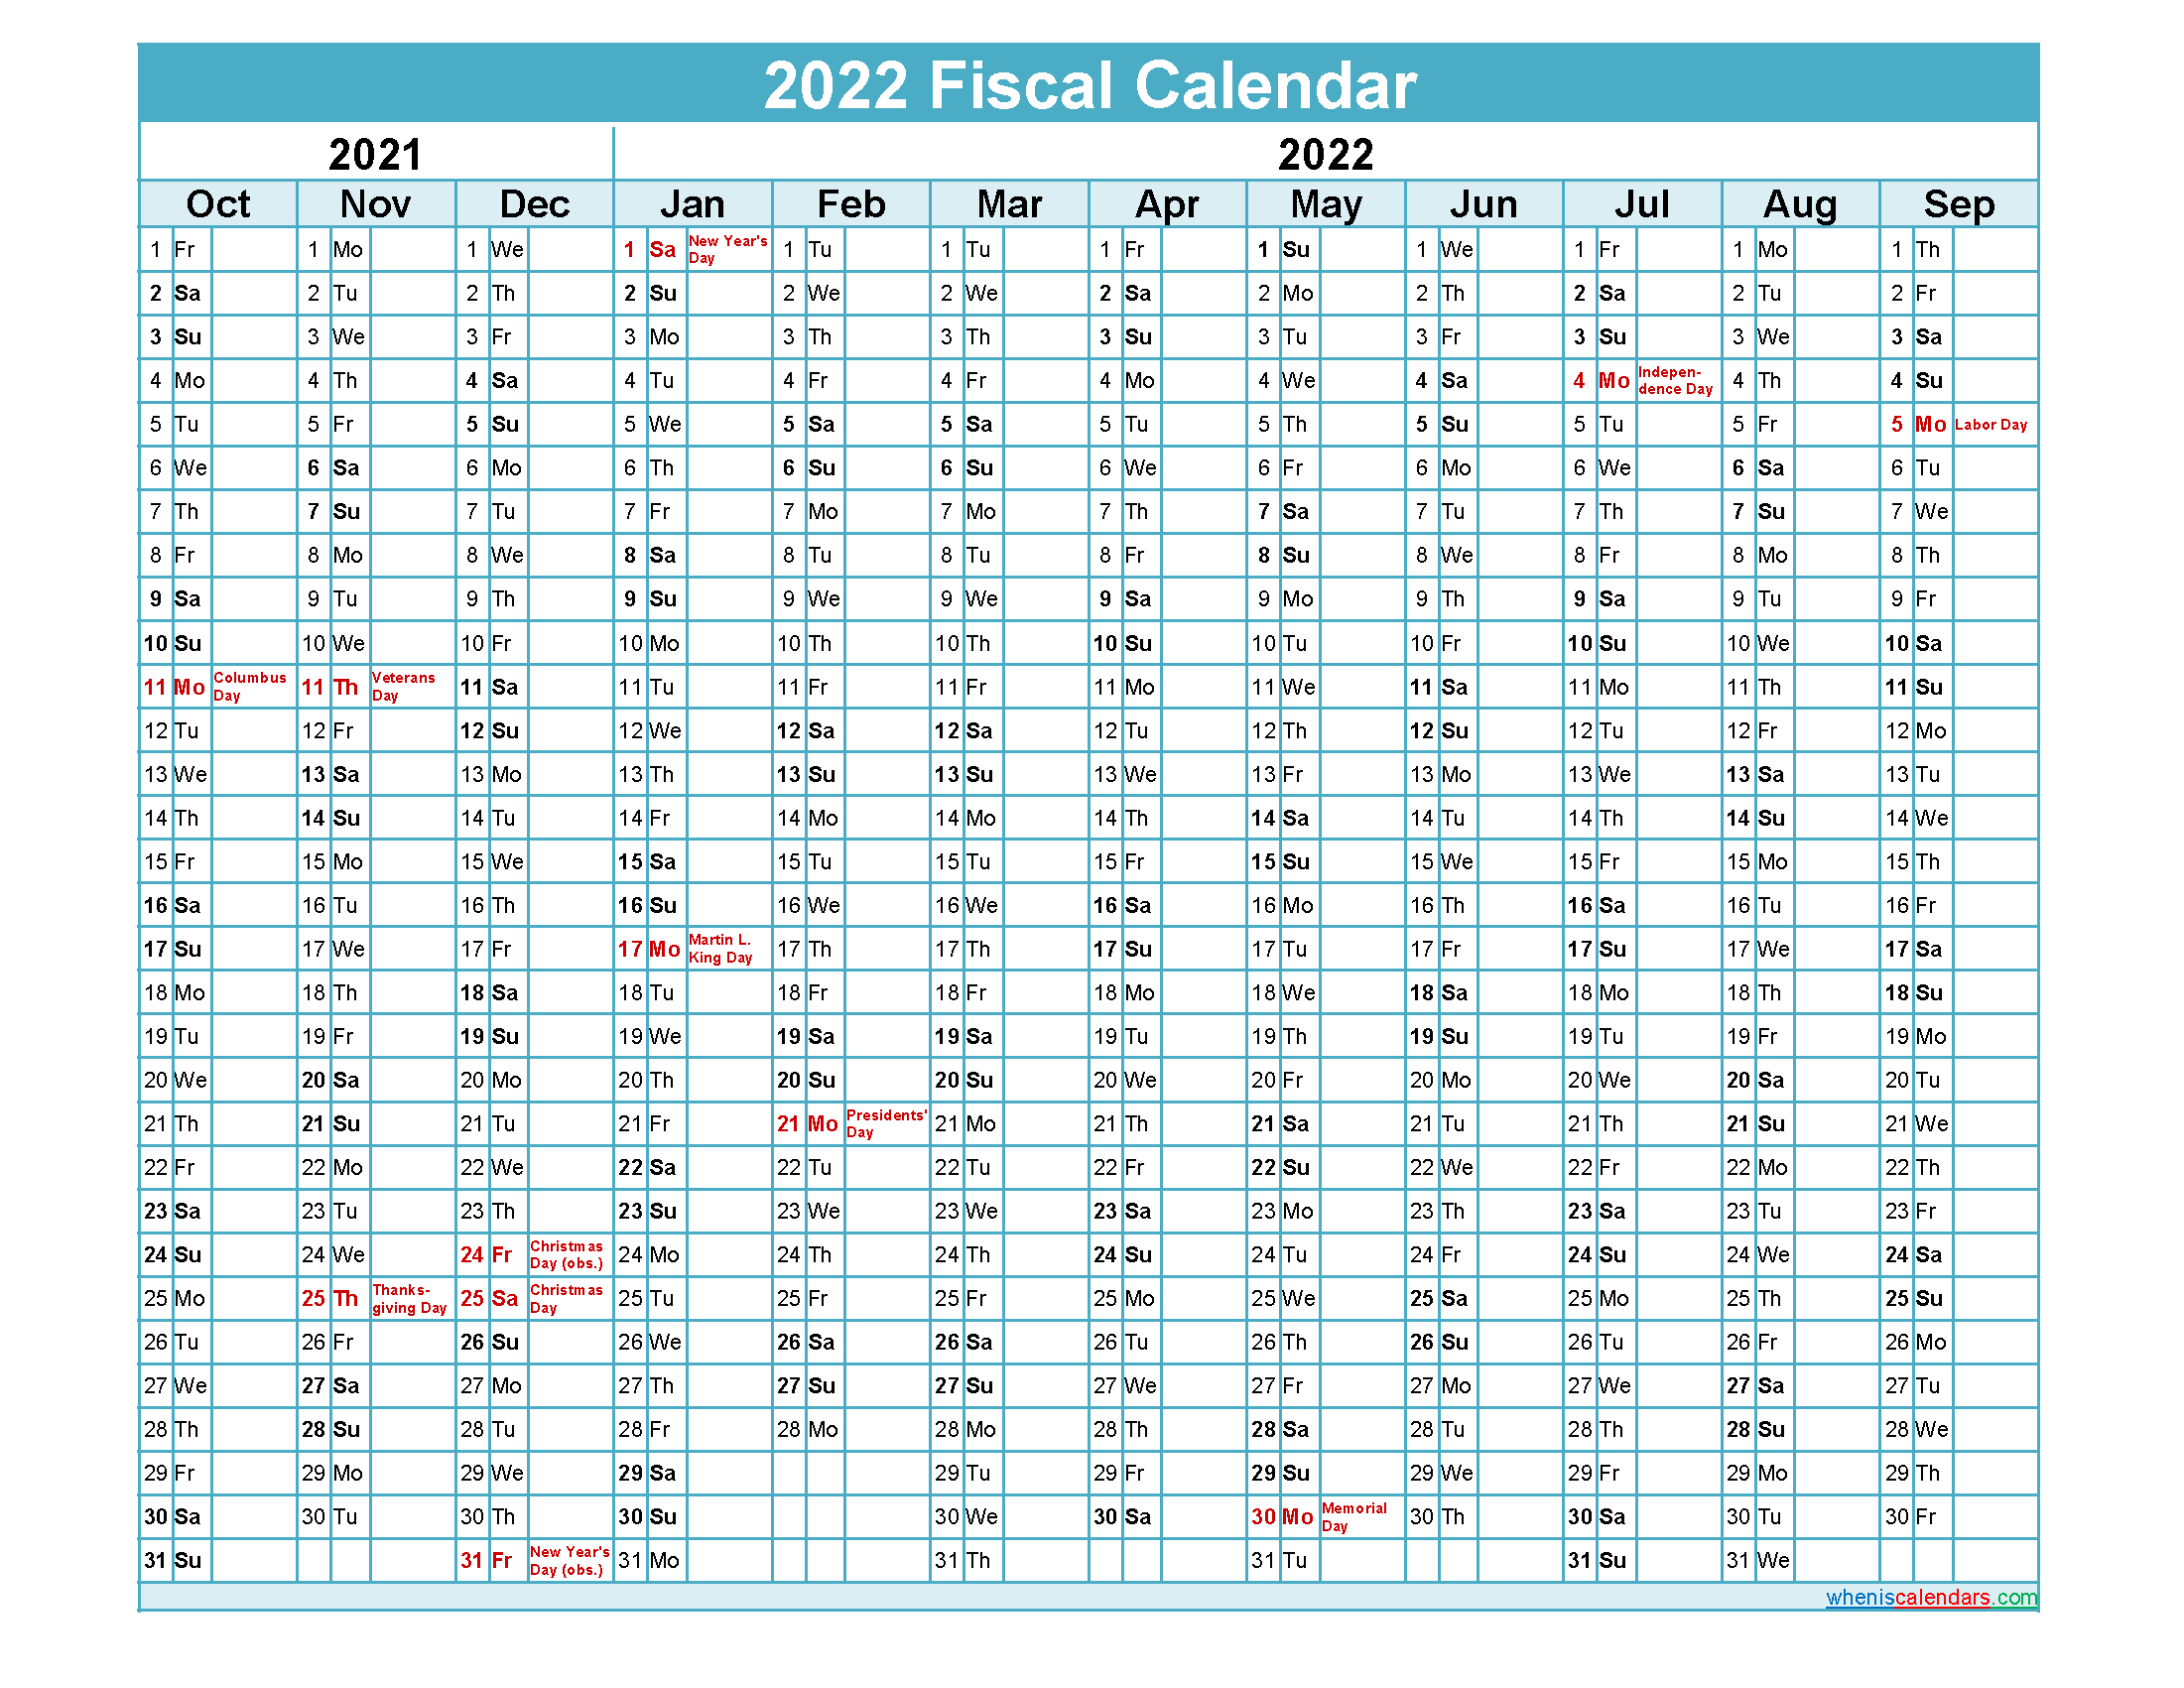 Fiscal Year Calendar 2022  Template No.fiscal22Y44 for Fiscal Year Calendar 2022 2022 Printable